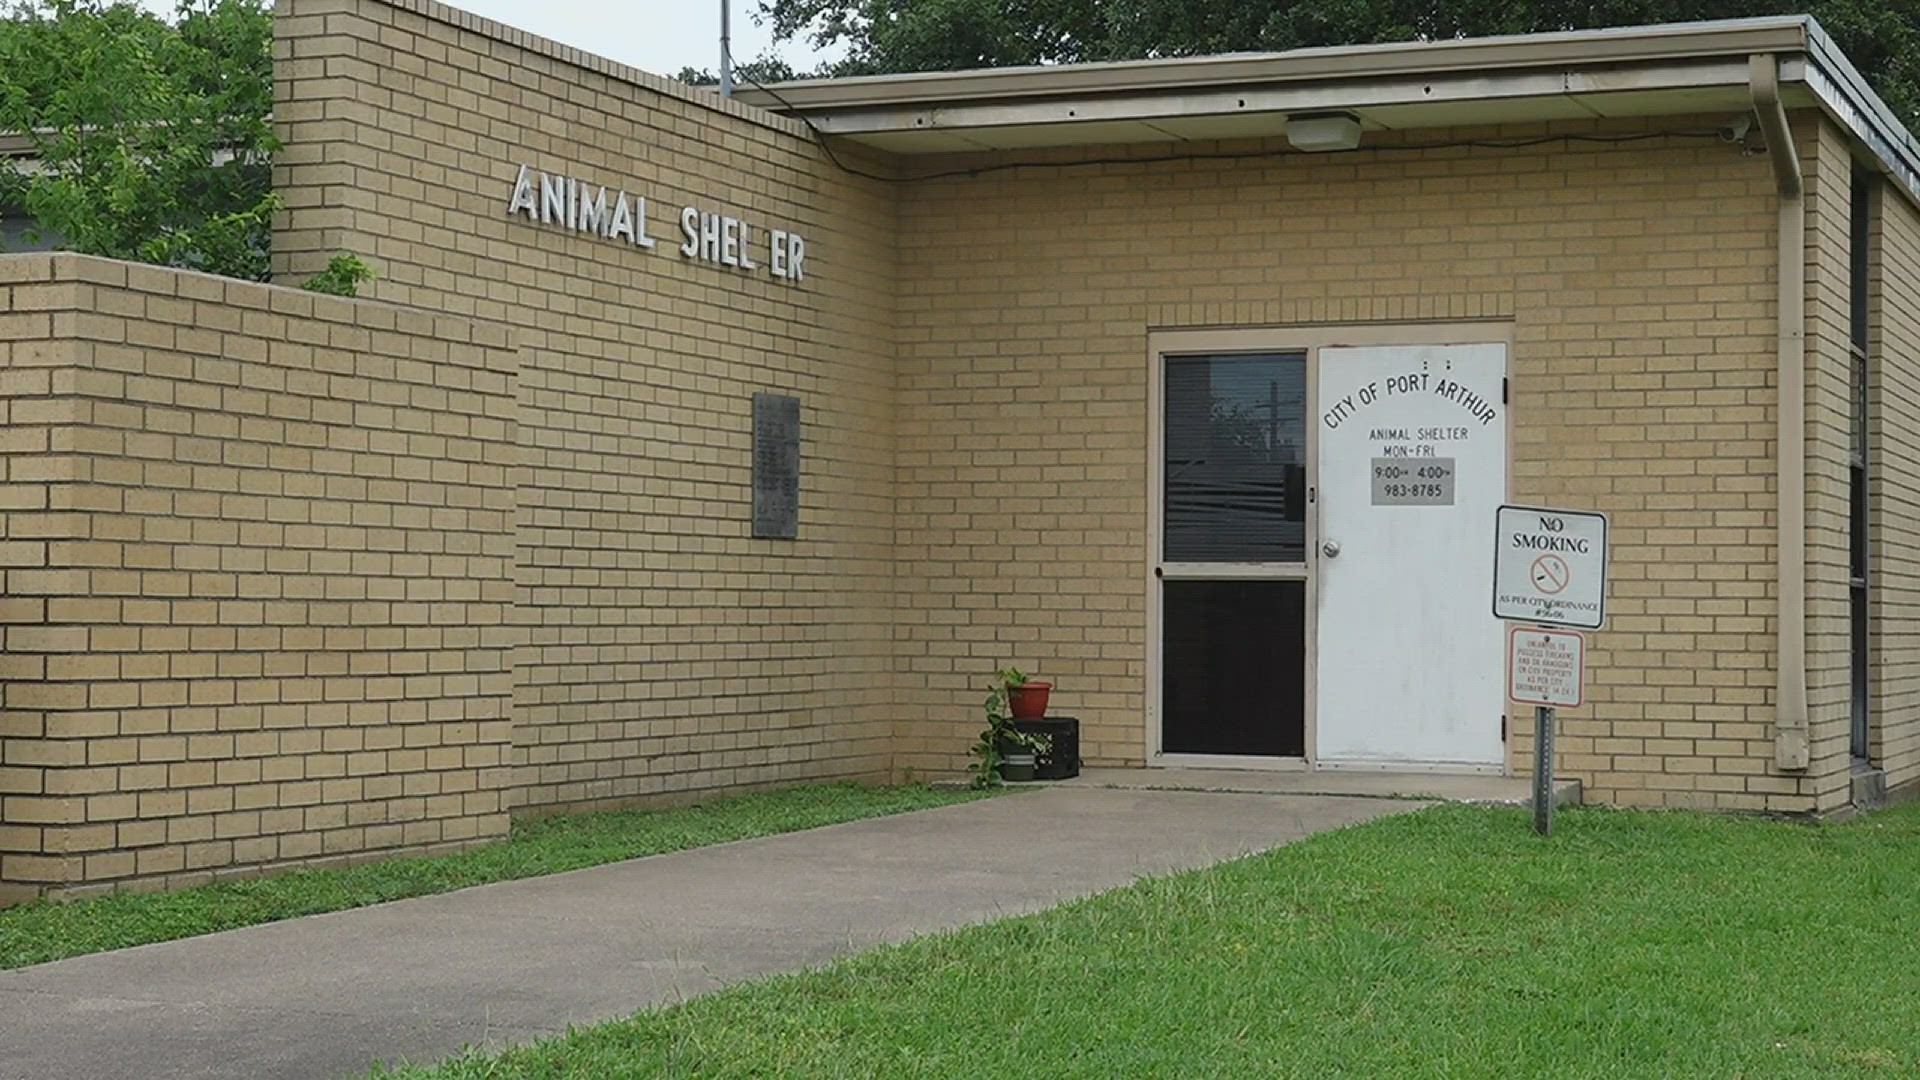 Veterinarian Dr. Kelley Kays says a new shelter is nice, but she doesn't want to wait and wants to start a vaccination program now to help break the cycle.